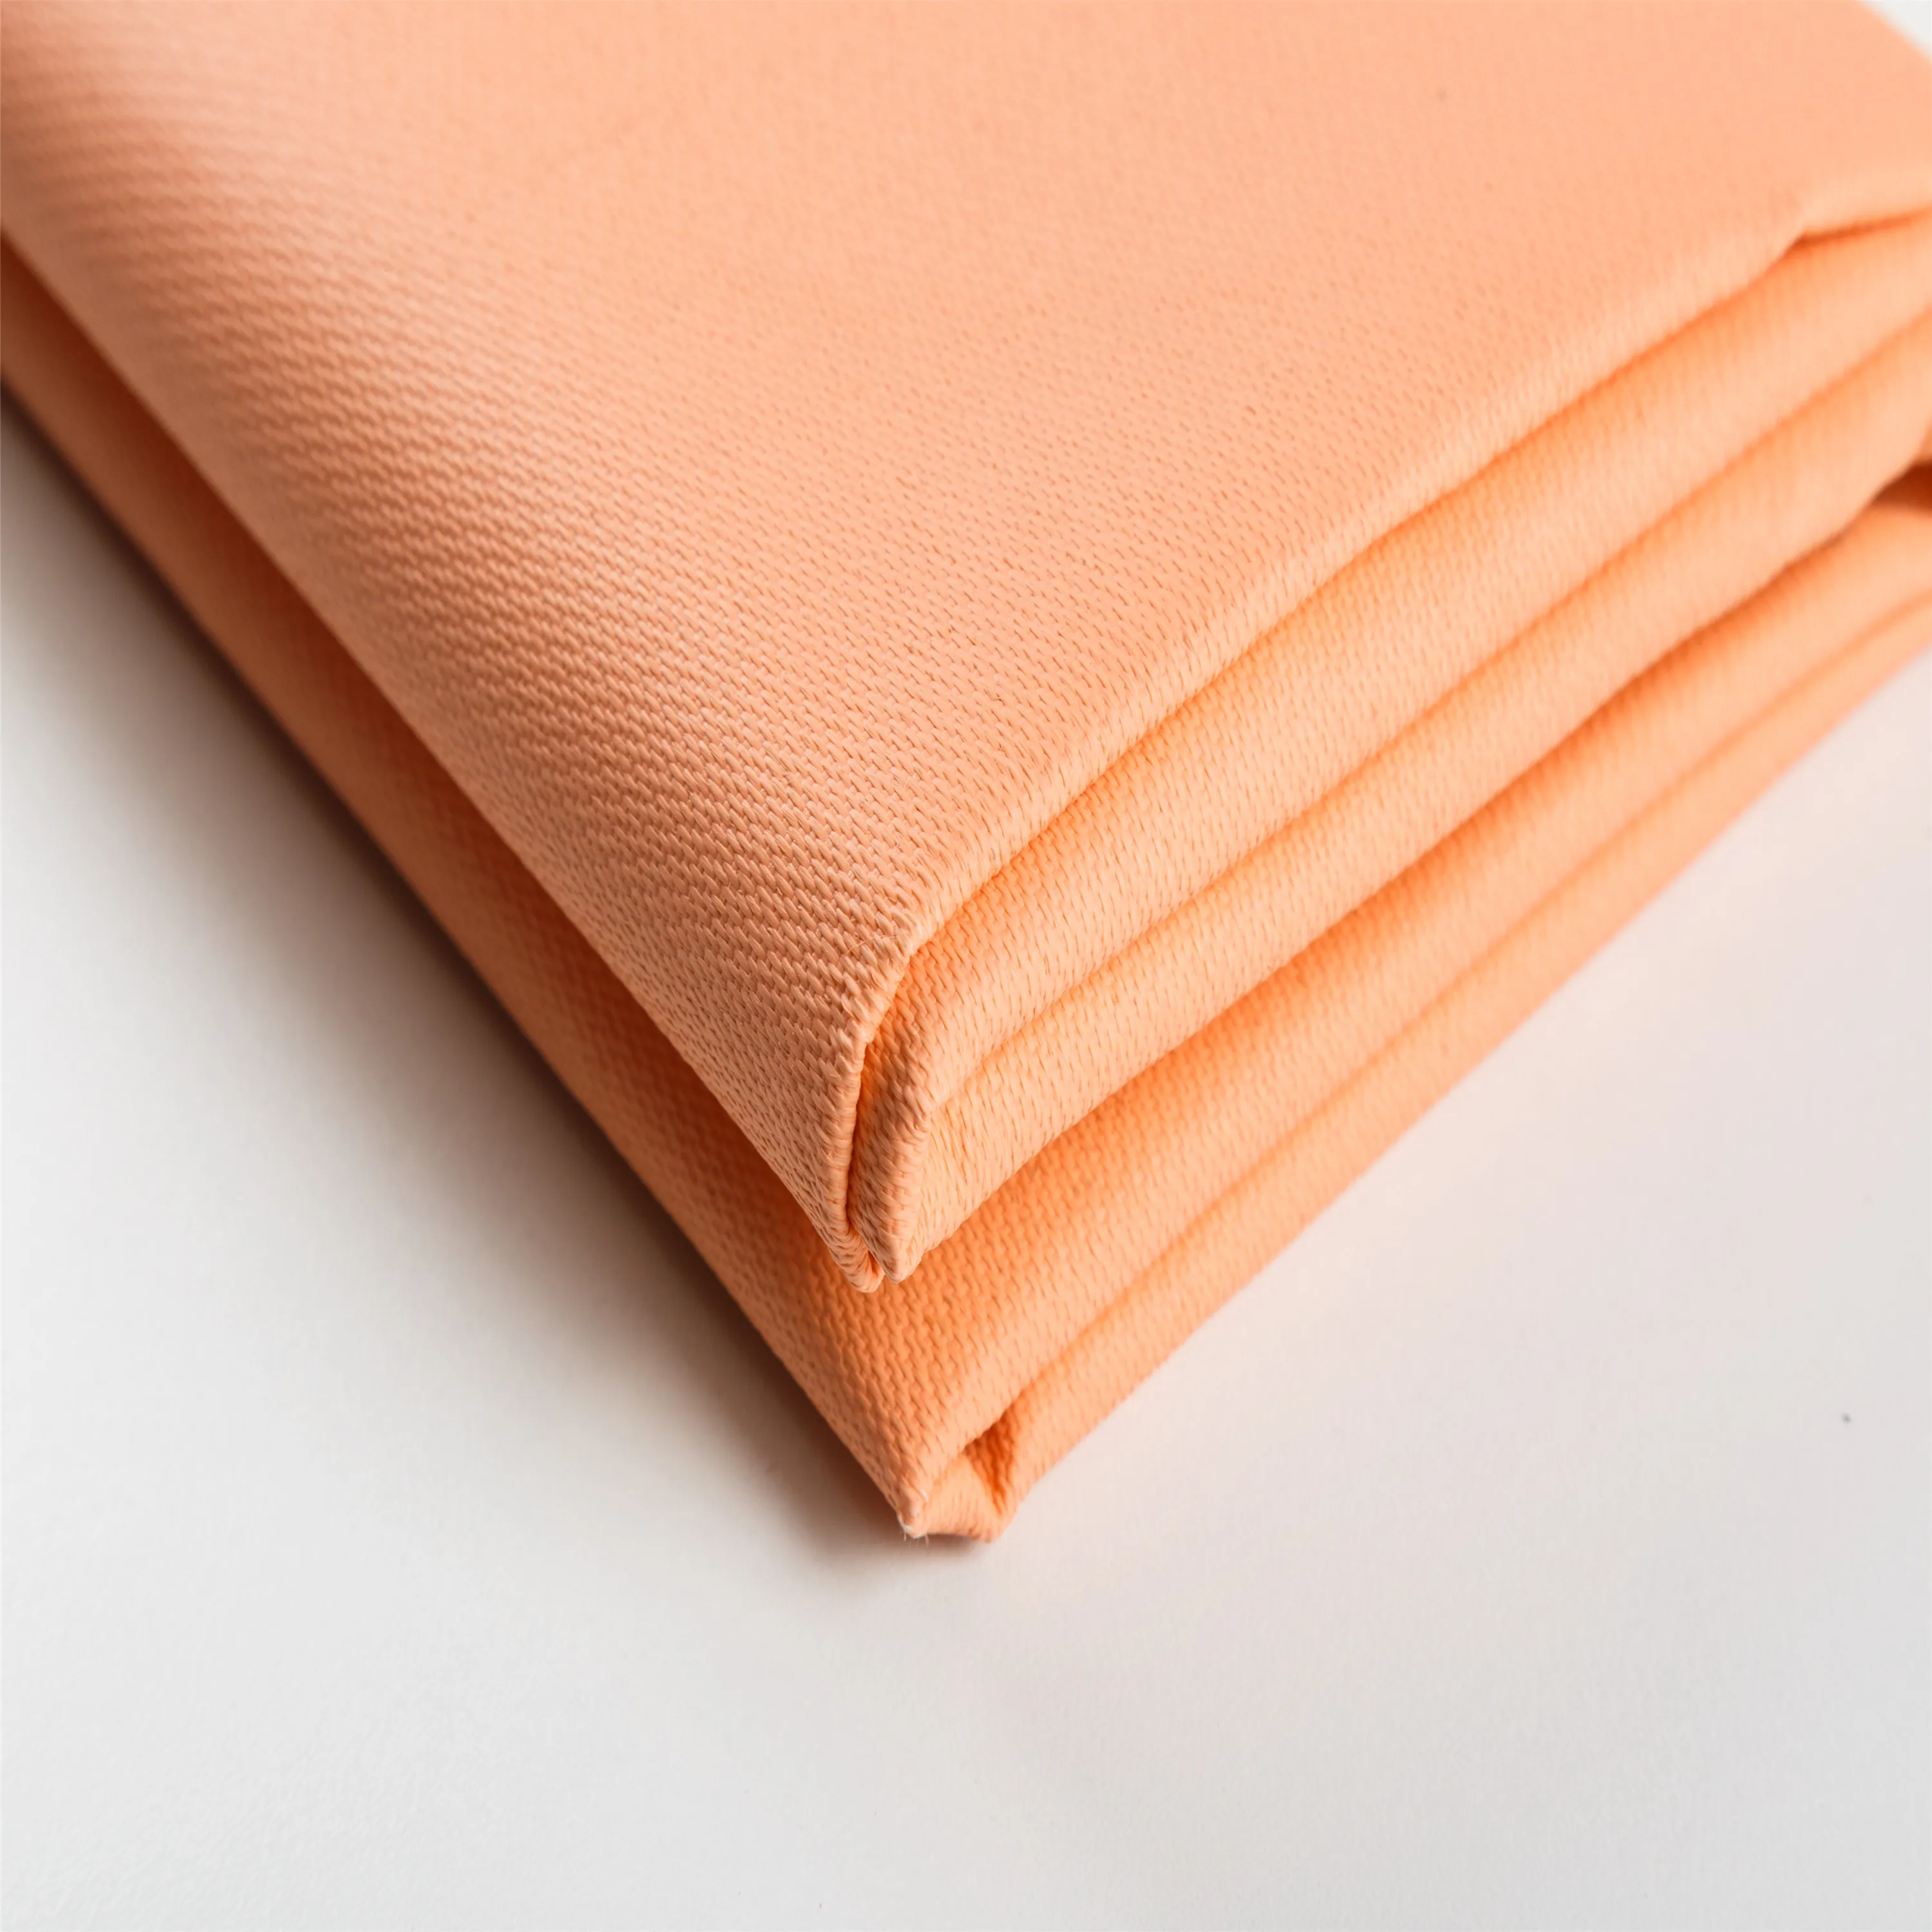 
Fire Blanket 1.2x1.8m orange silicon coated Emergency Fire Retardant Protection and Heat Insulation Fiberglass Fire Blanket 